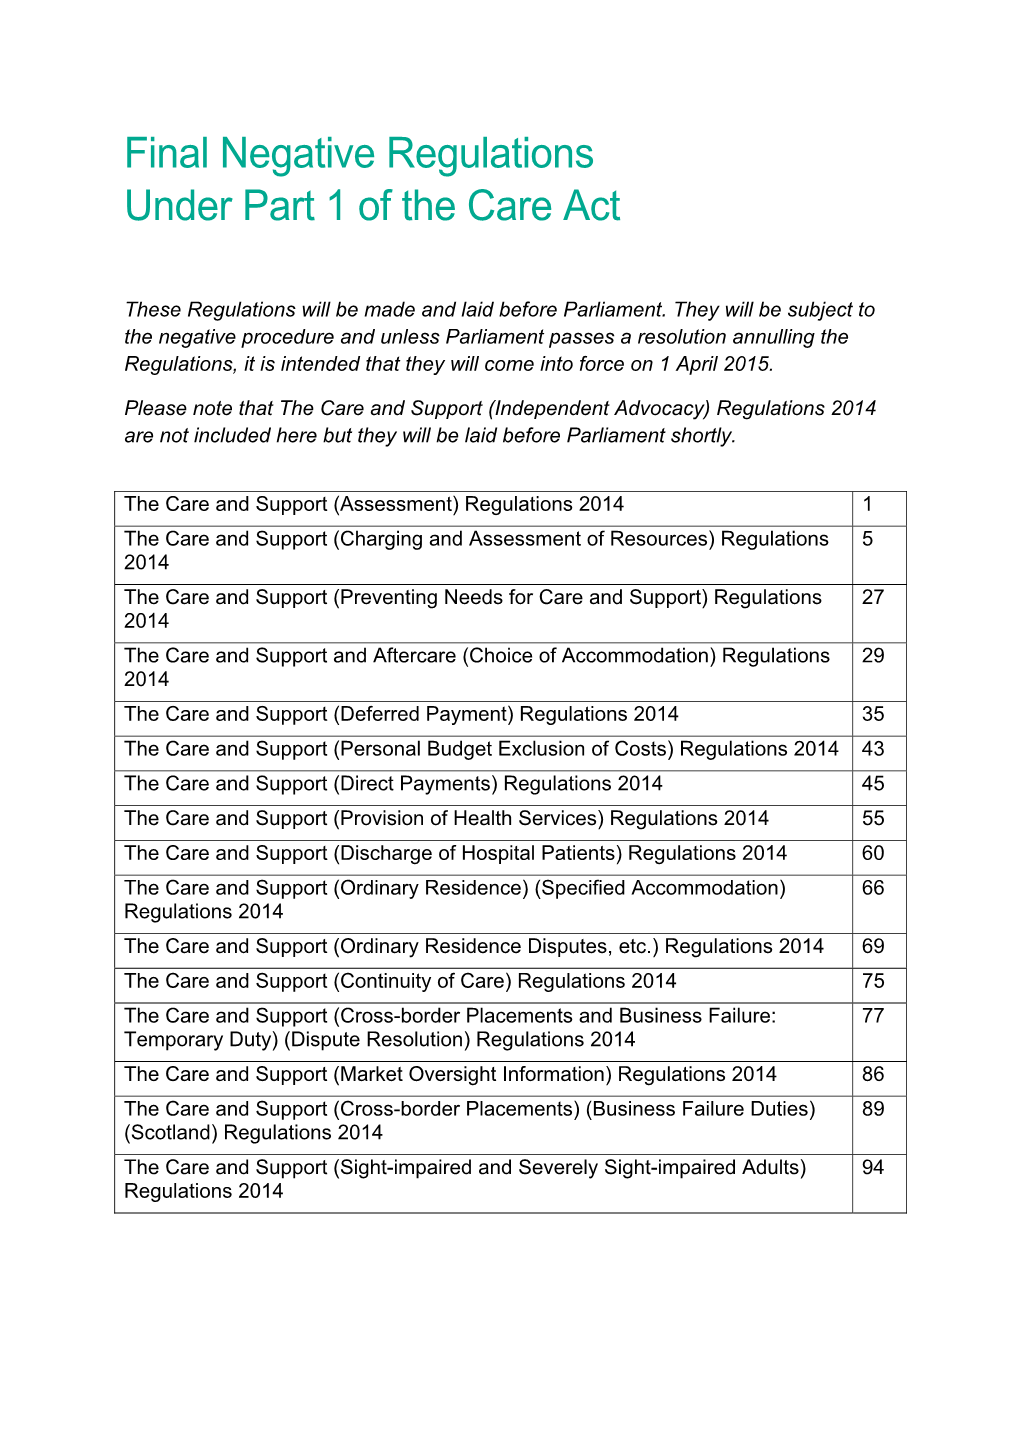 Final Negative Regulations Under Part 1 of the Care Act